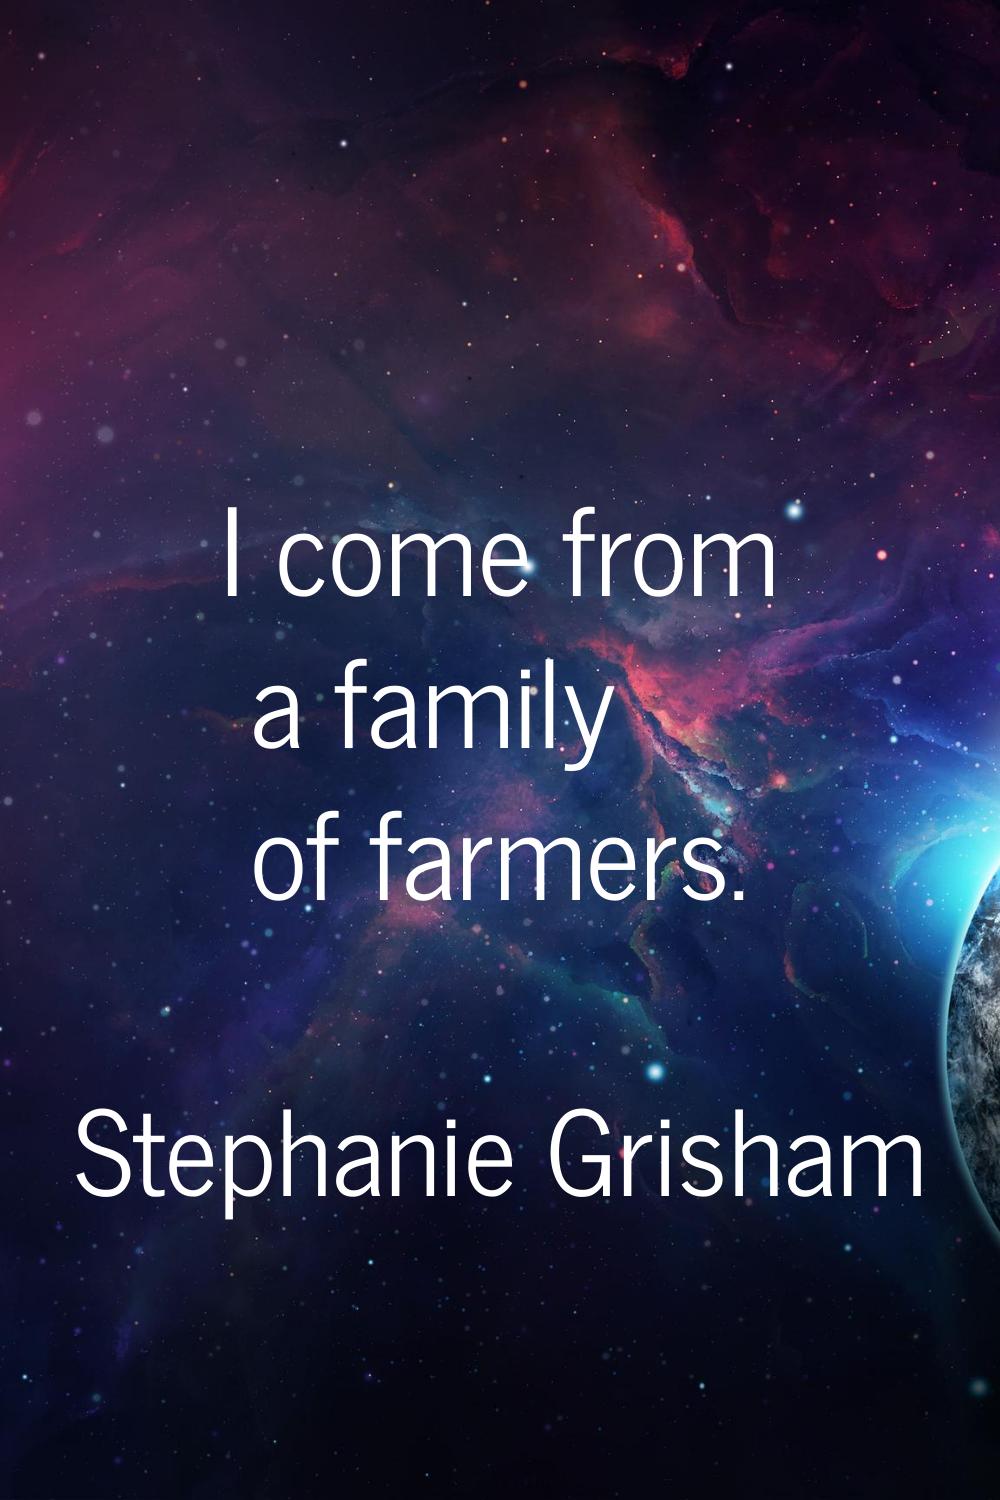 I come from a family of farmers.